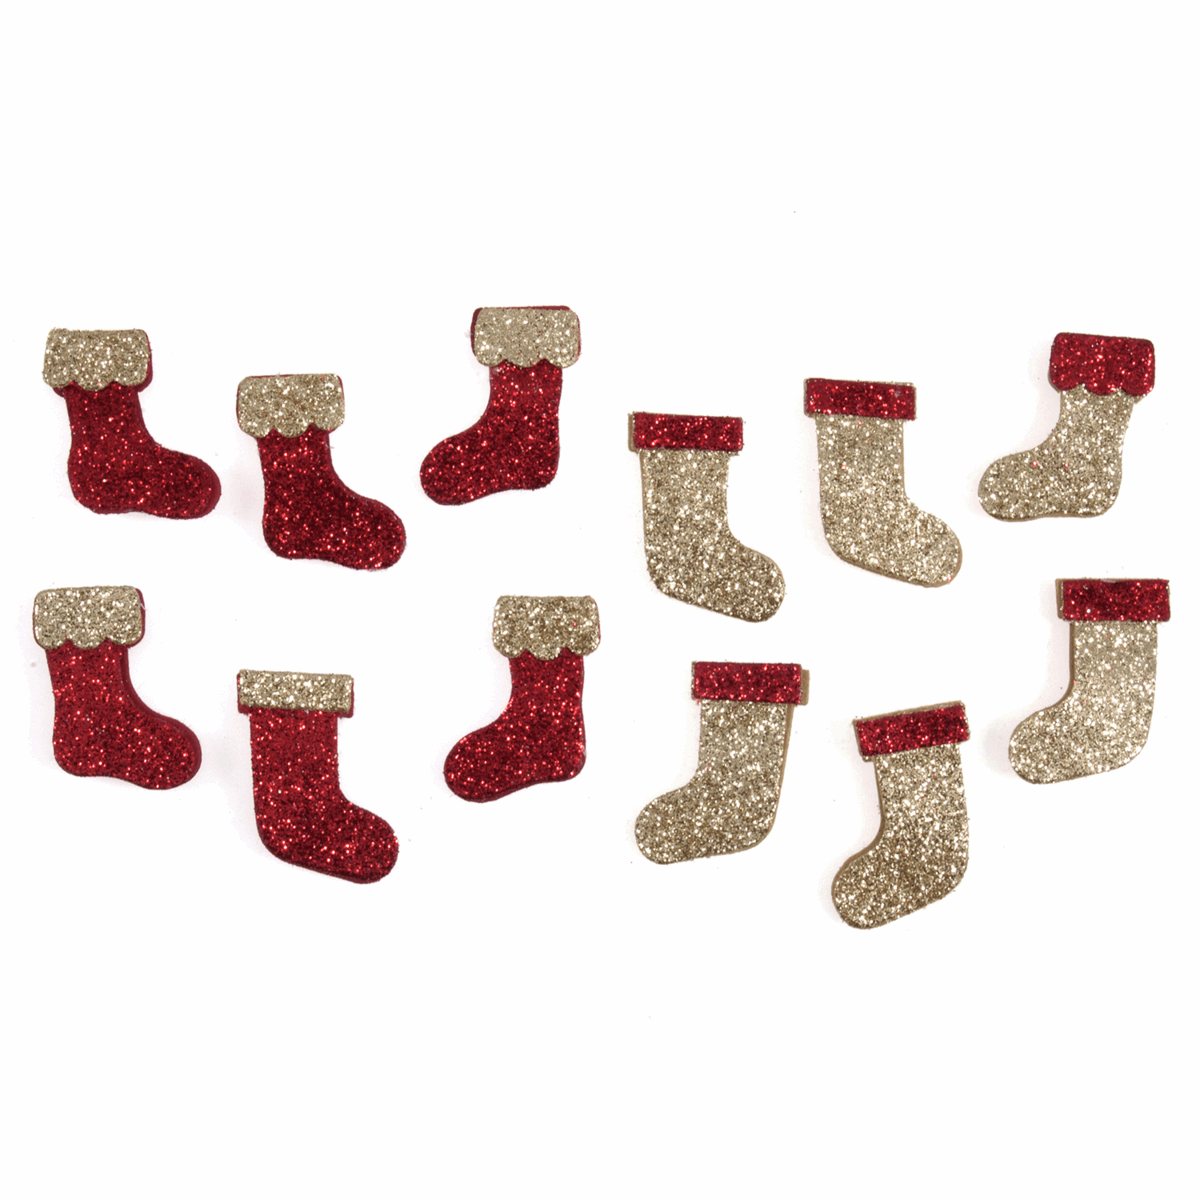 Trimits Craft Embellishments - Red/Gold Glitter Stockings (Pack of 12)